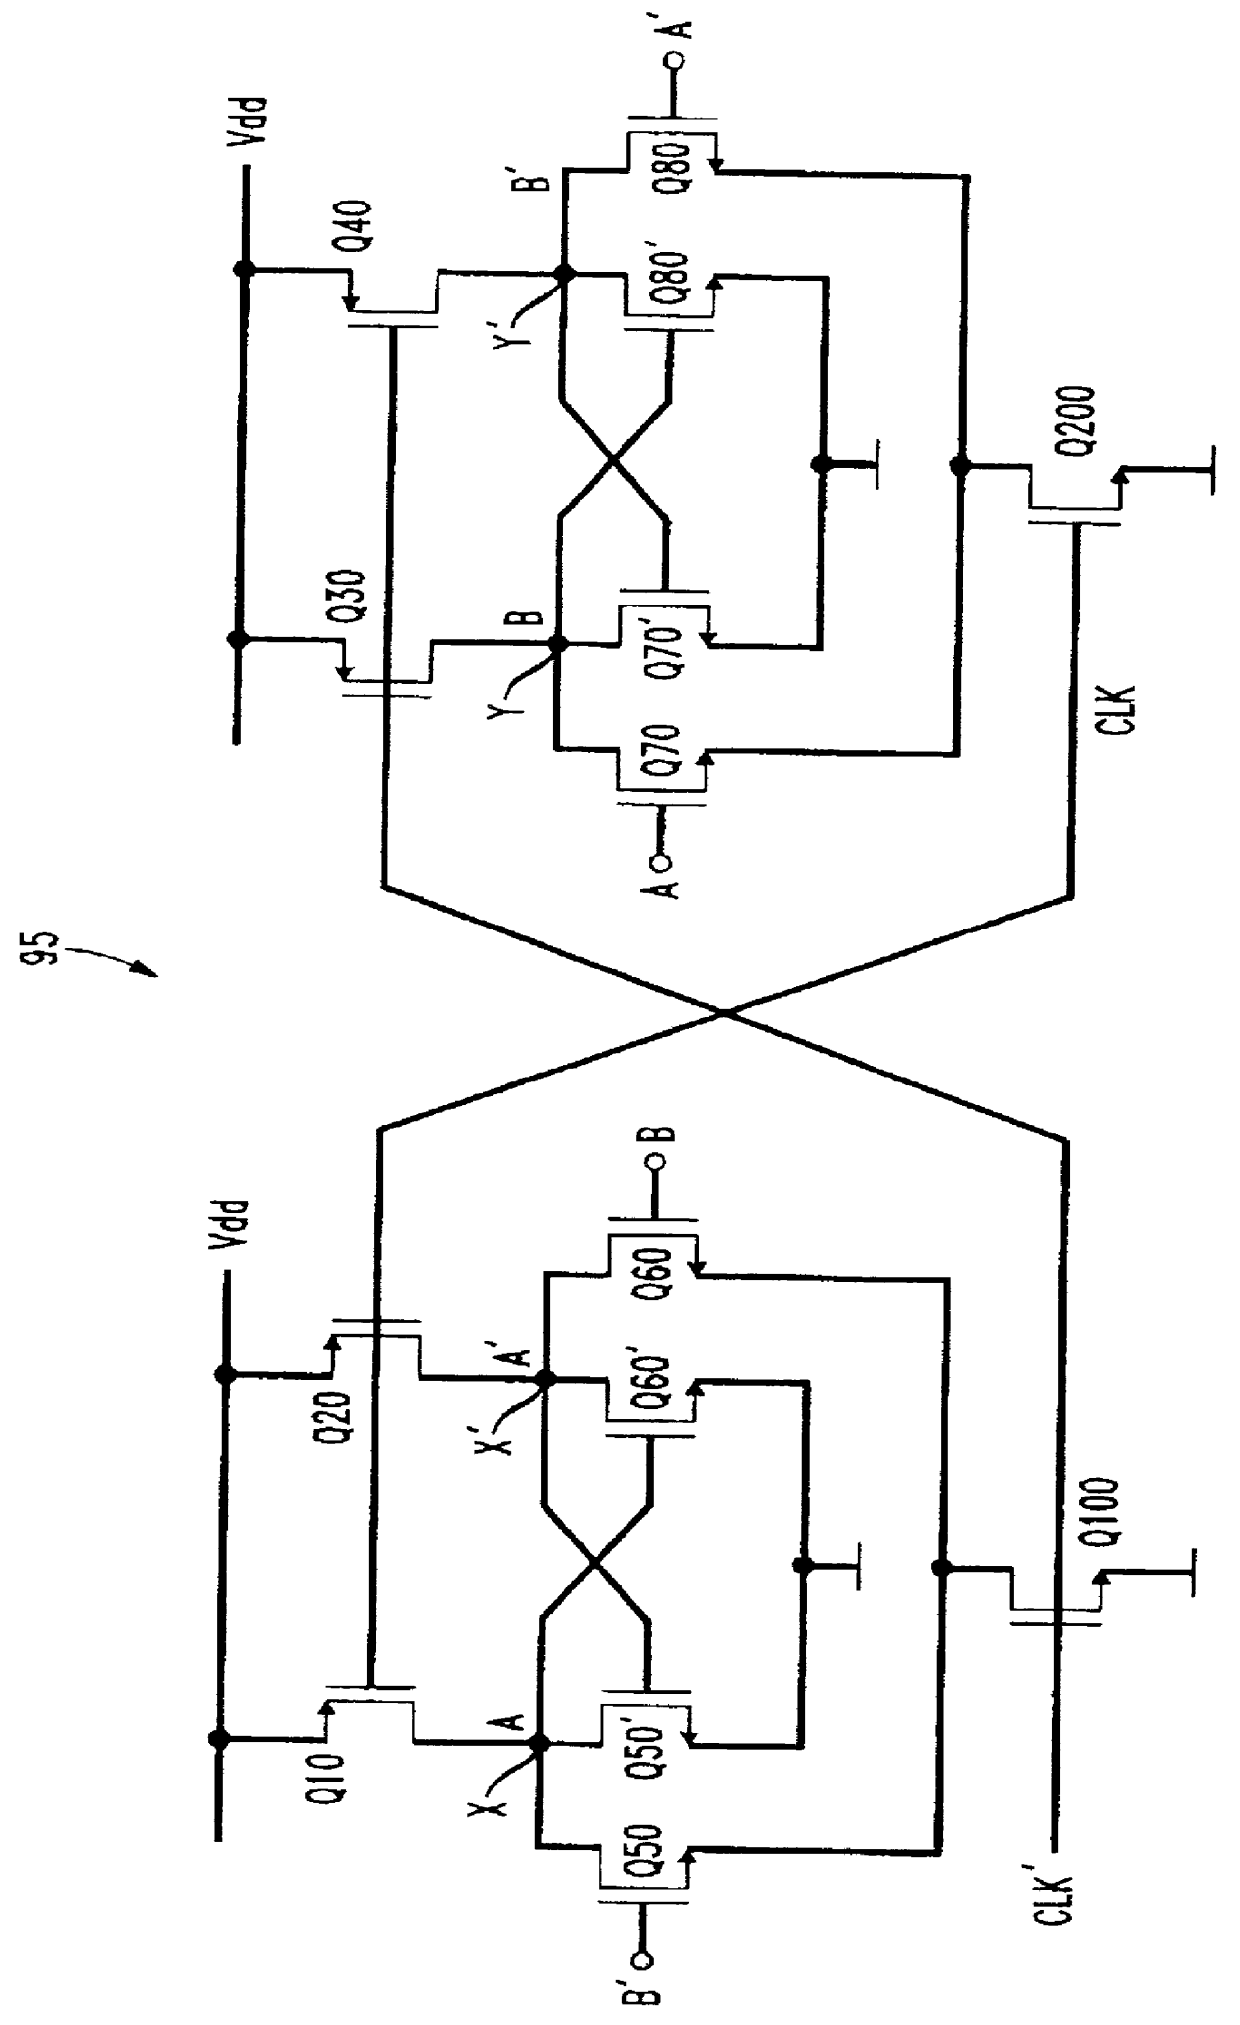 High speed frequency divider circuit